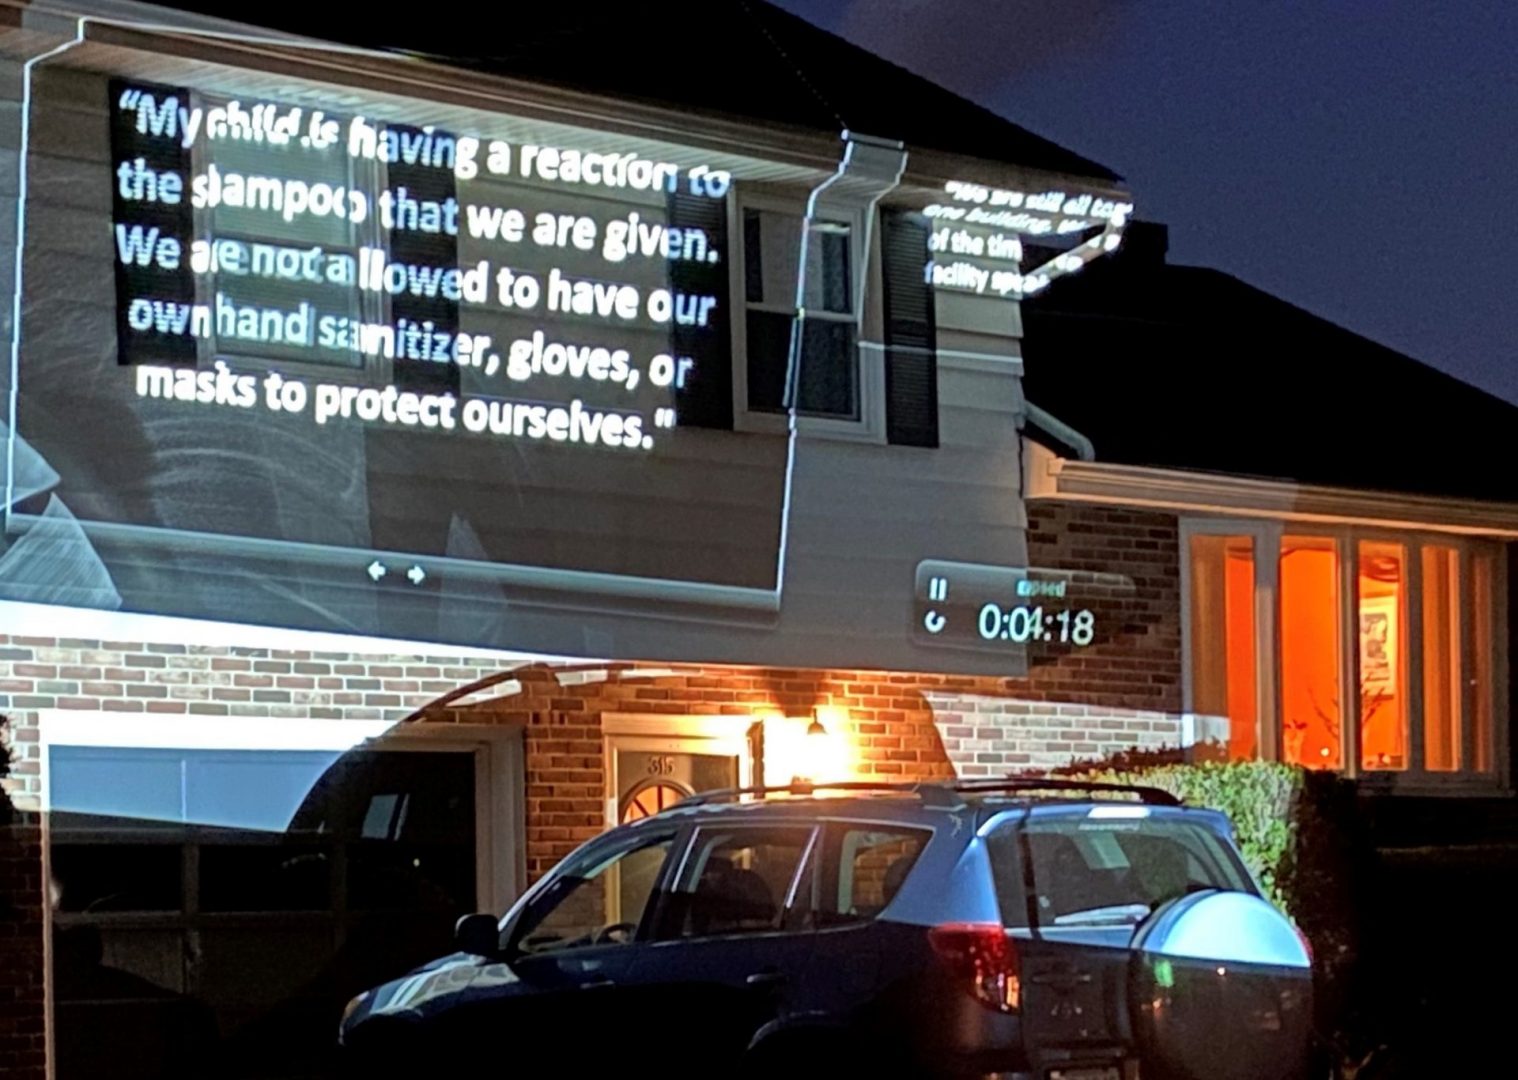 Protesters calling for the release of families held at the Berks Detention Center used a projector to illuminate the outside of Berks County Commissioner Michael Rivera's home on Monday, June 29, 2020.